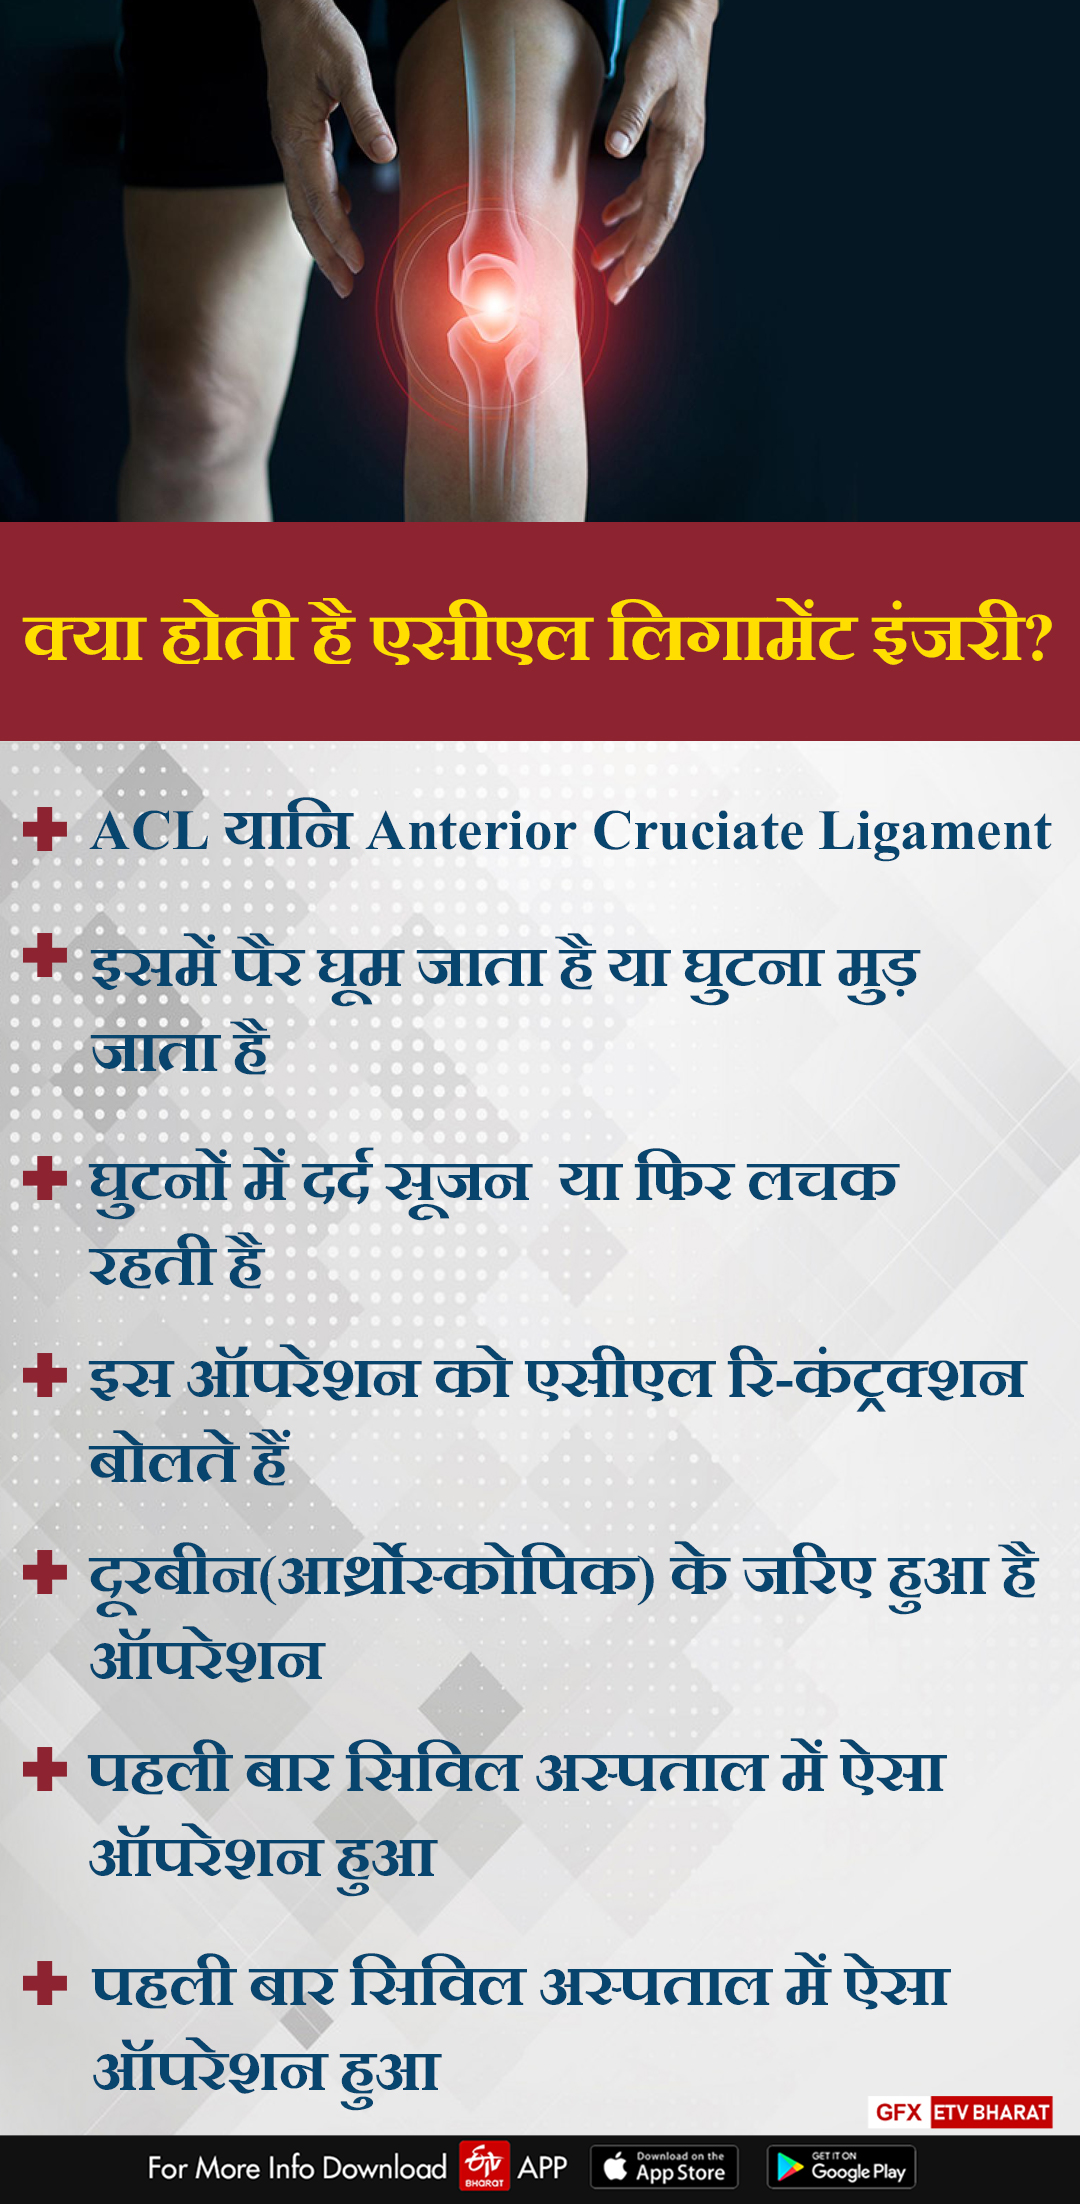 karnal-civil-hospital-done-telescopic-knee-operation-for-the-first-time-in-haryana